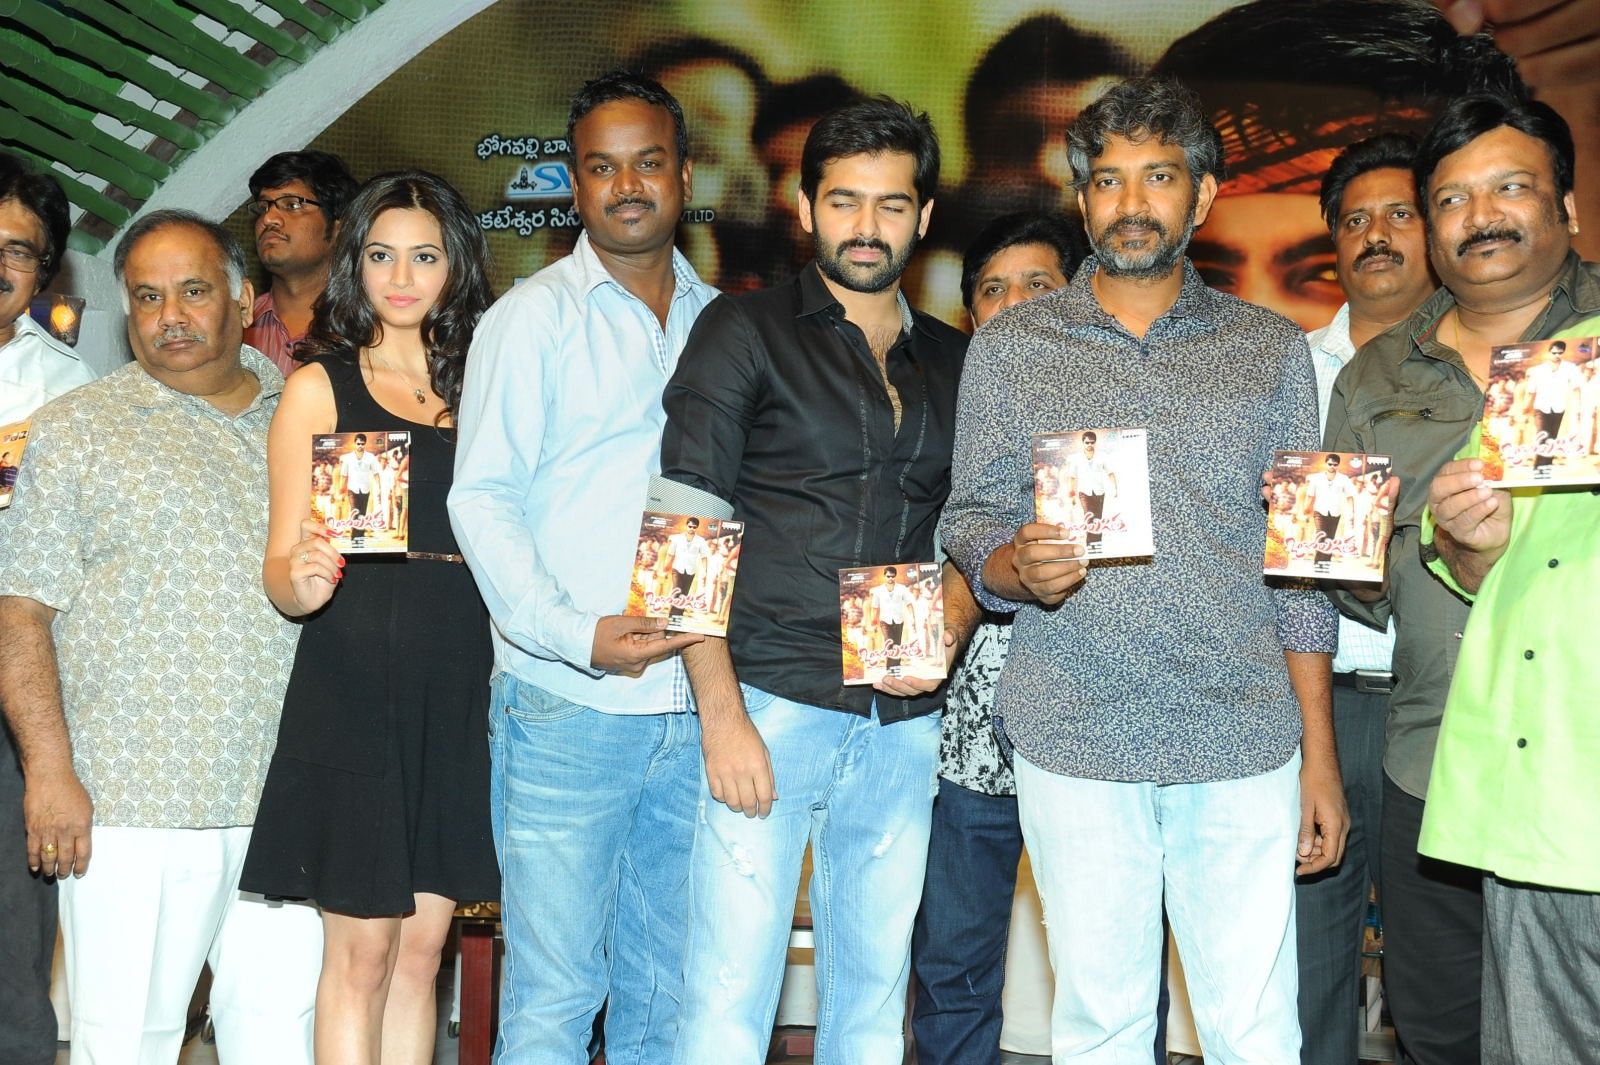 Ongole Gitta Audio Release Pictures | Picture 362100